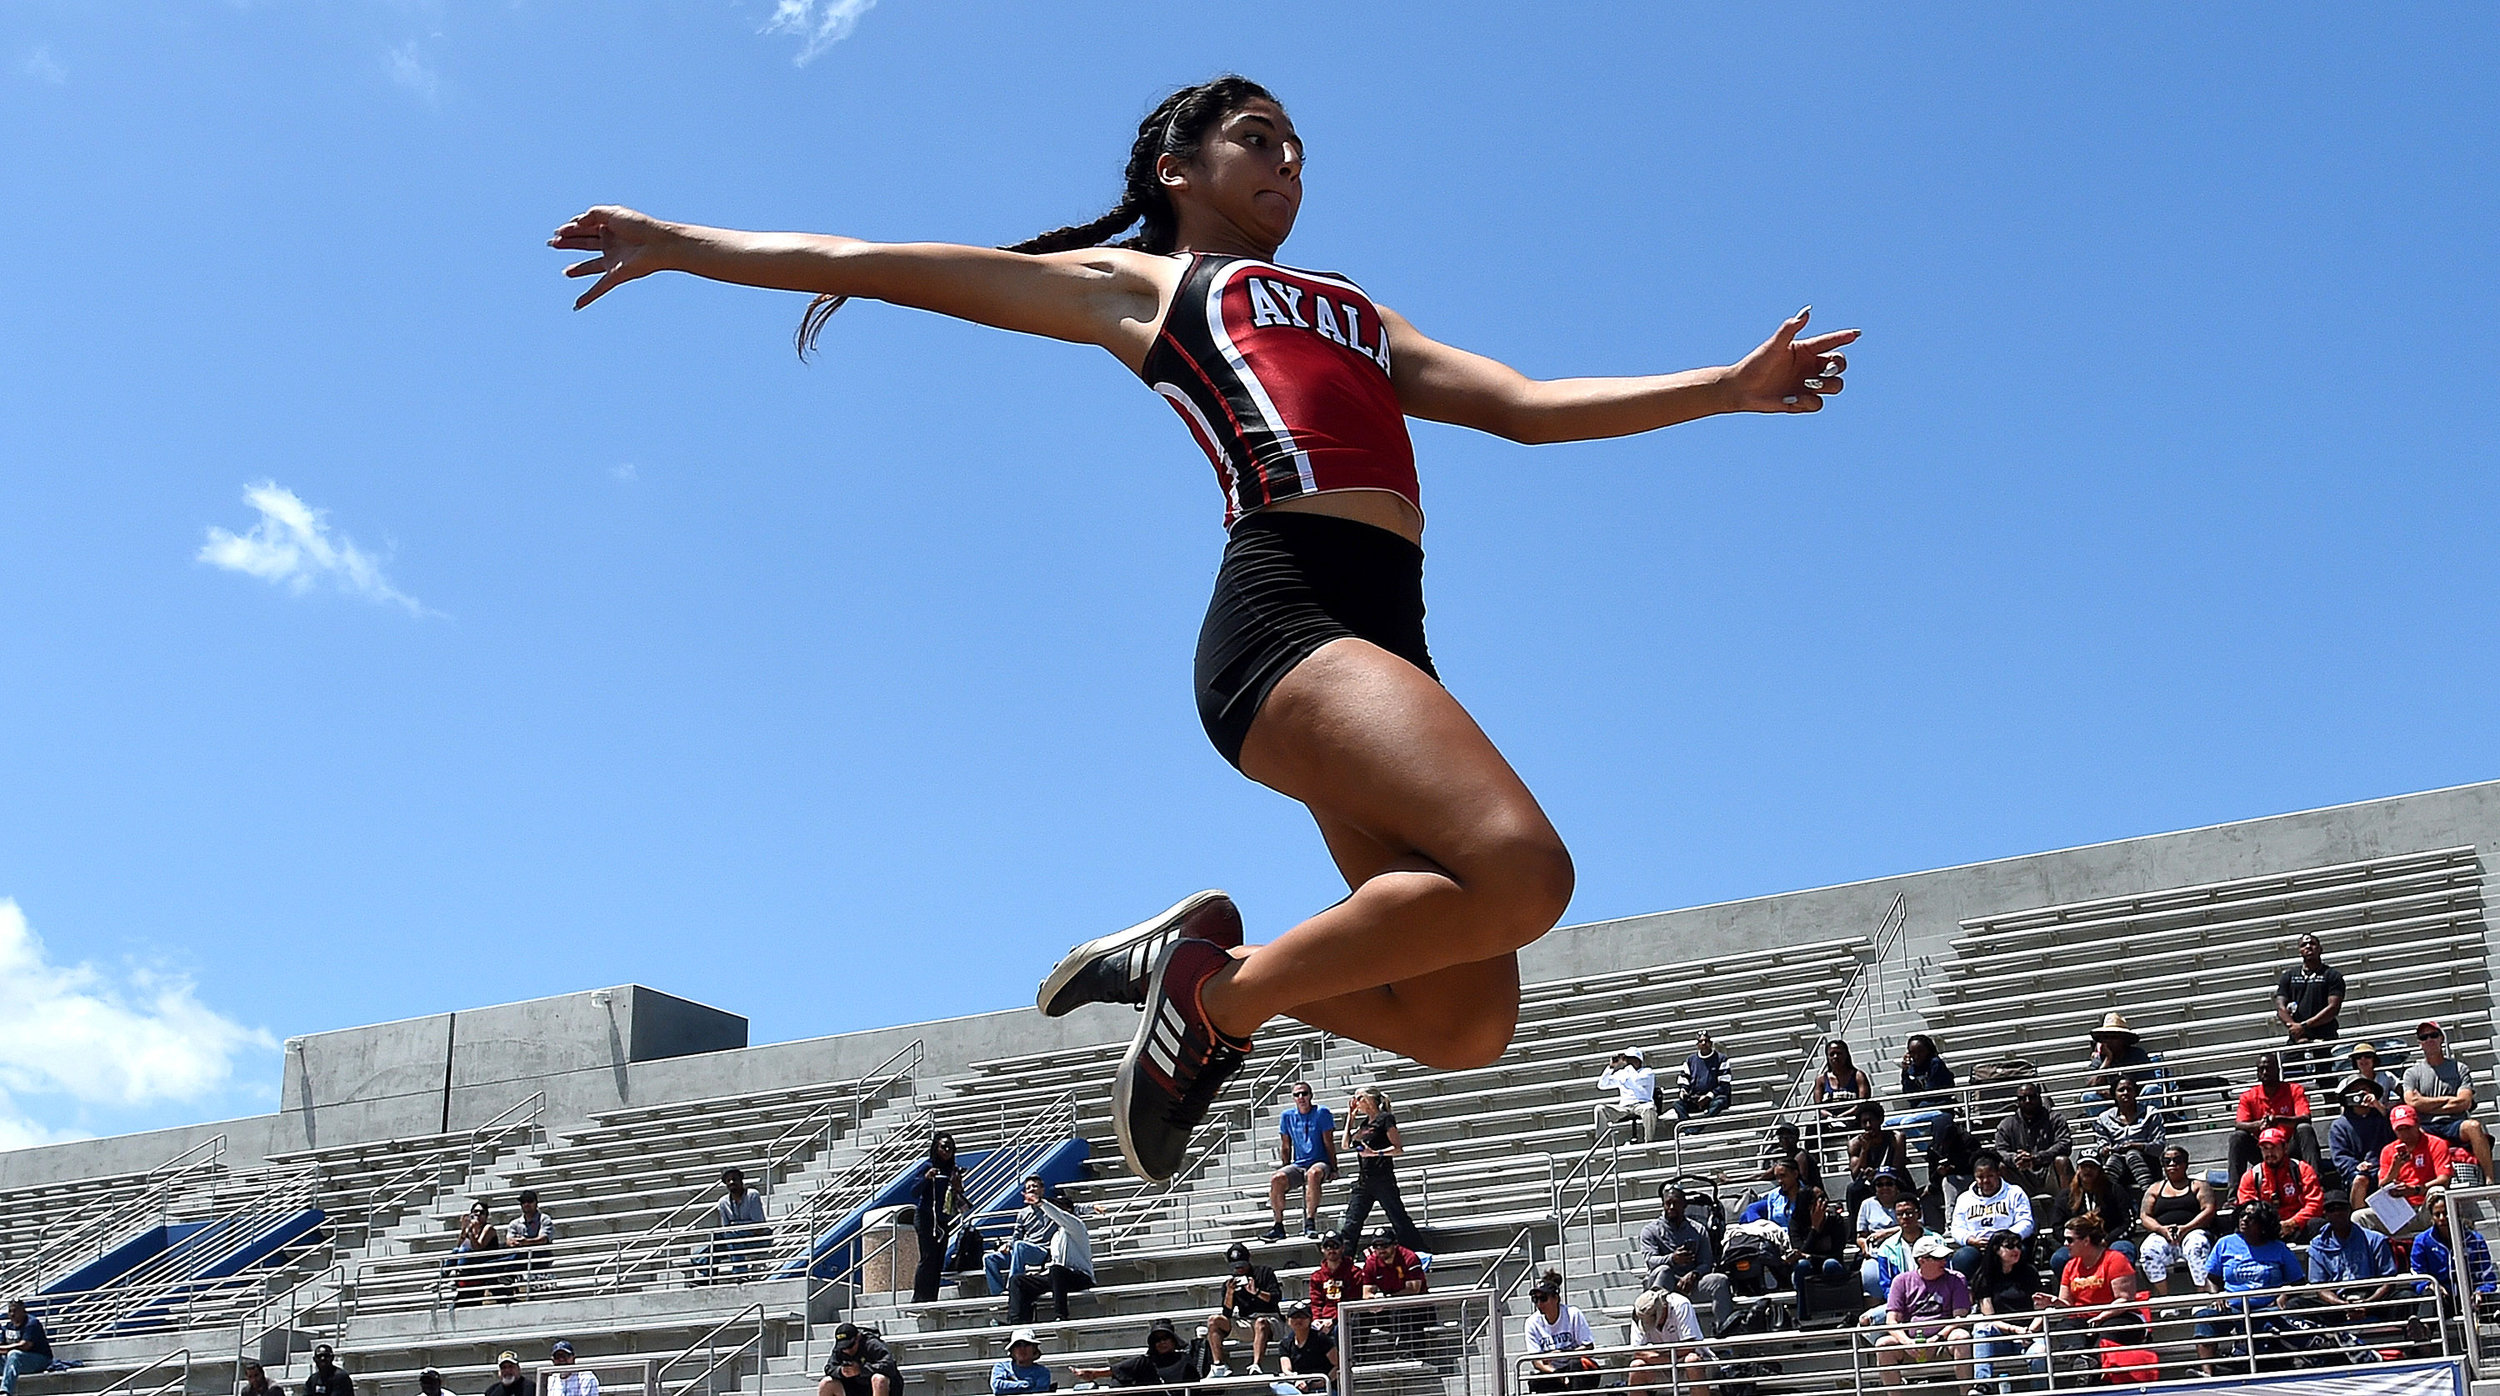  Aya;s's Anyssa Romo competes in the long jump during the CIF-SS Track and Field Masters meet at El Camino College in Torrance, Calif., on Saturday, May 26, 2018.  